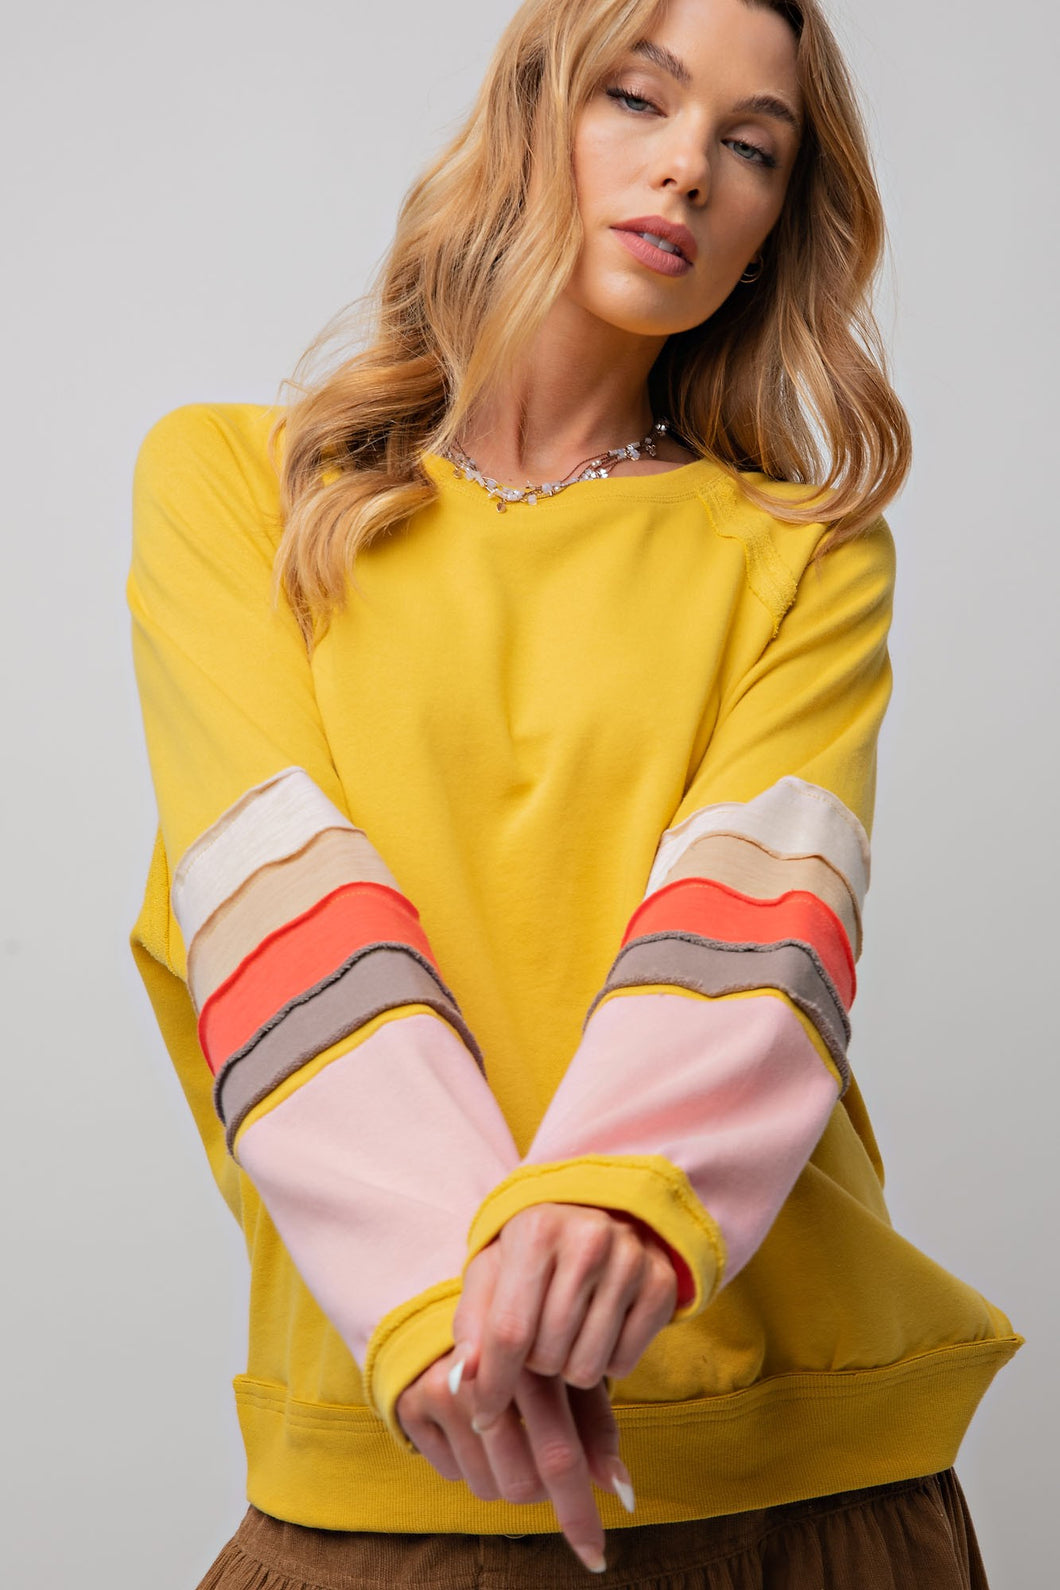 Easel Loose Fit Terry Knit Top in Sunflower Shirts & Tops Easel   